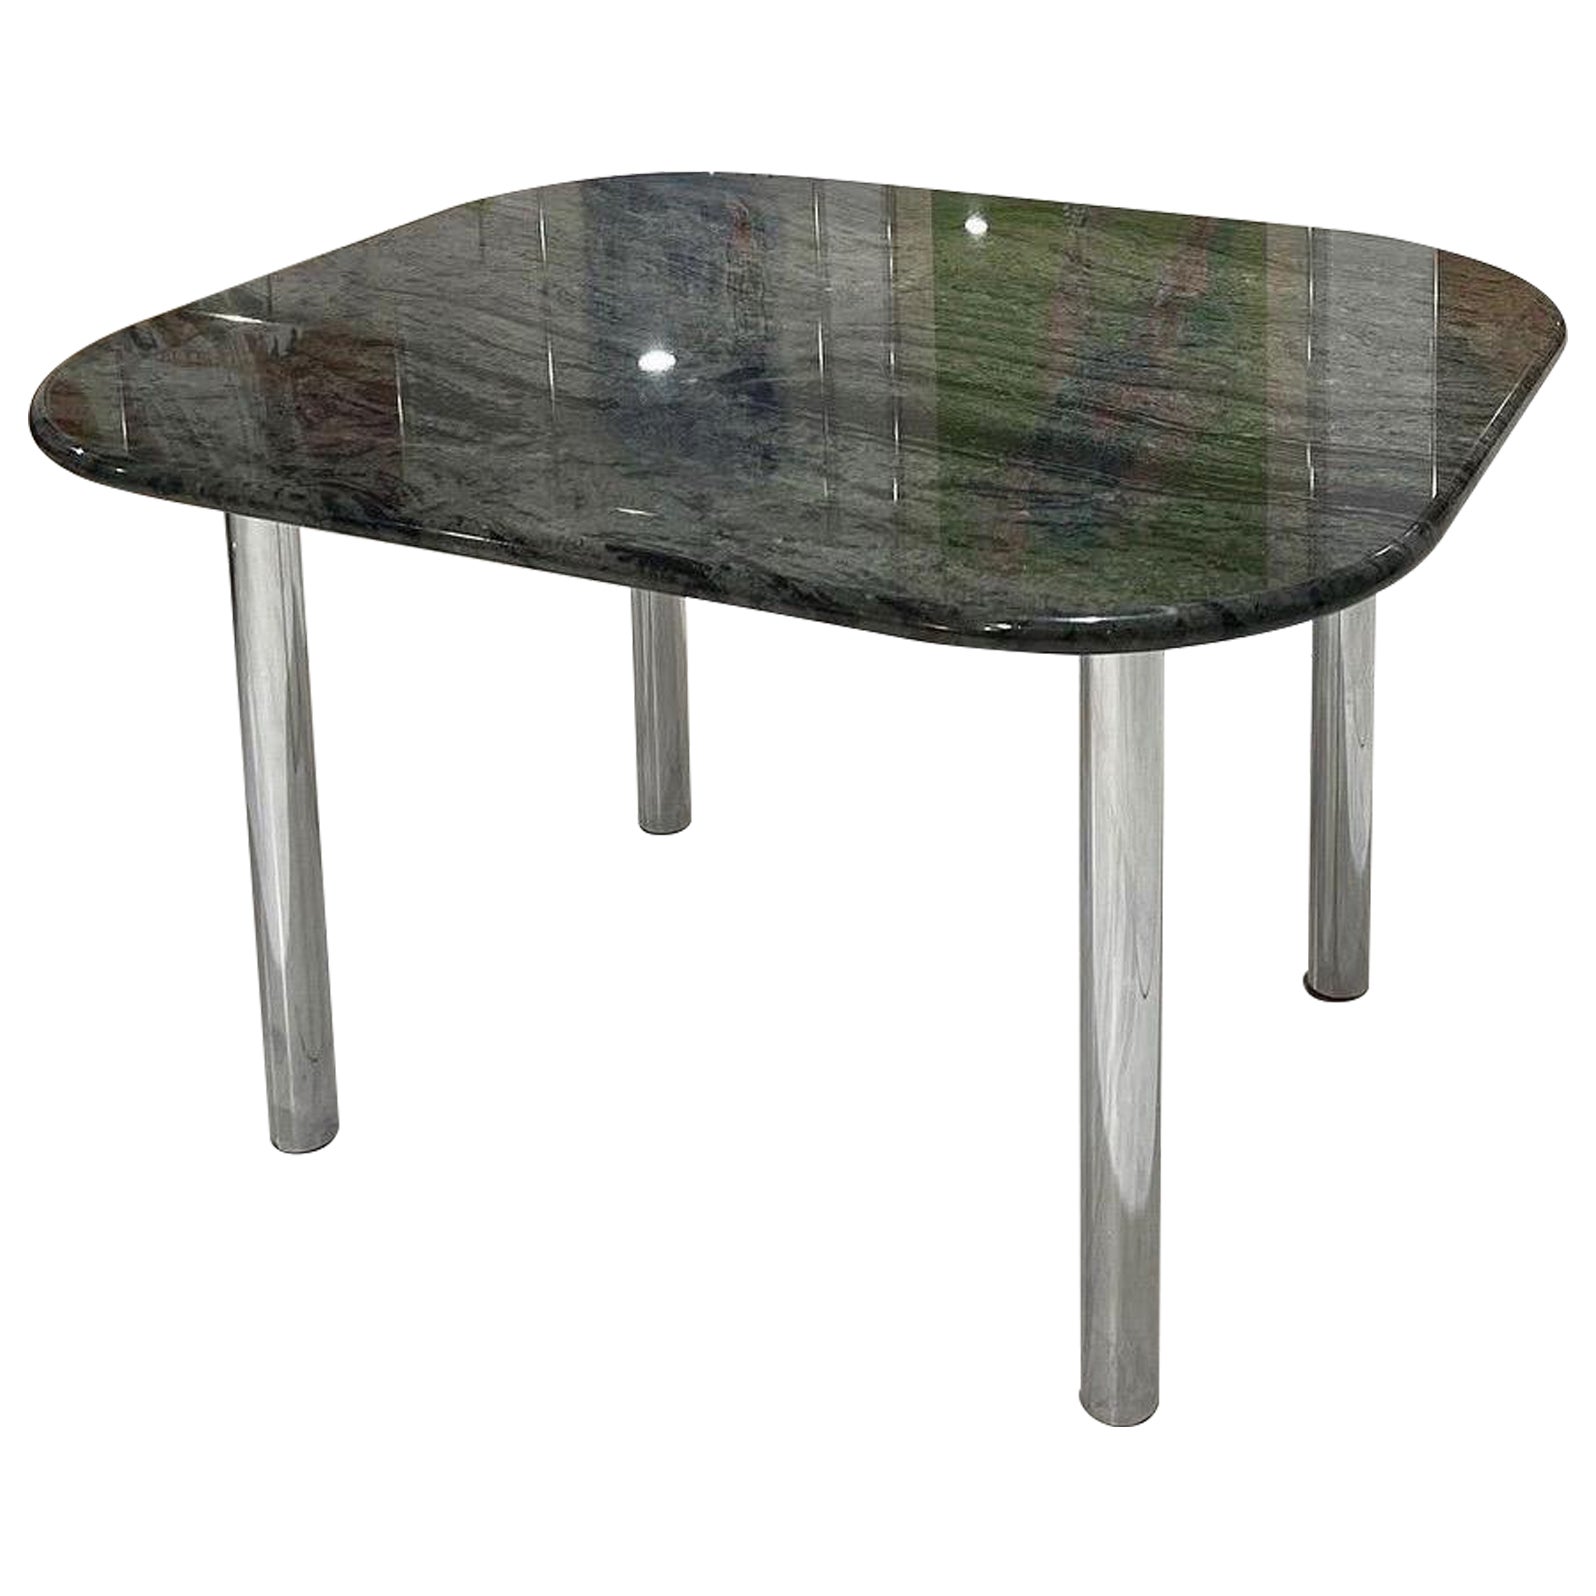 Absolutely Stunning Custom Post Modern Chrome & Green Marble Dining Table